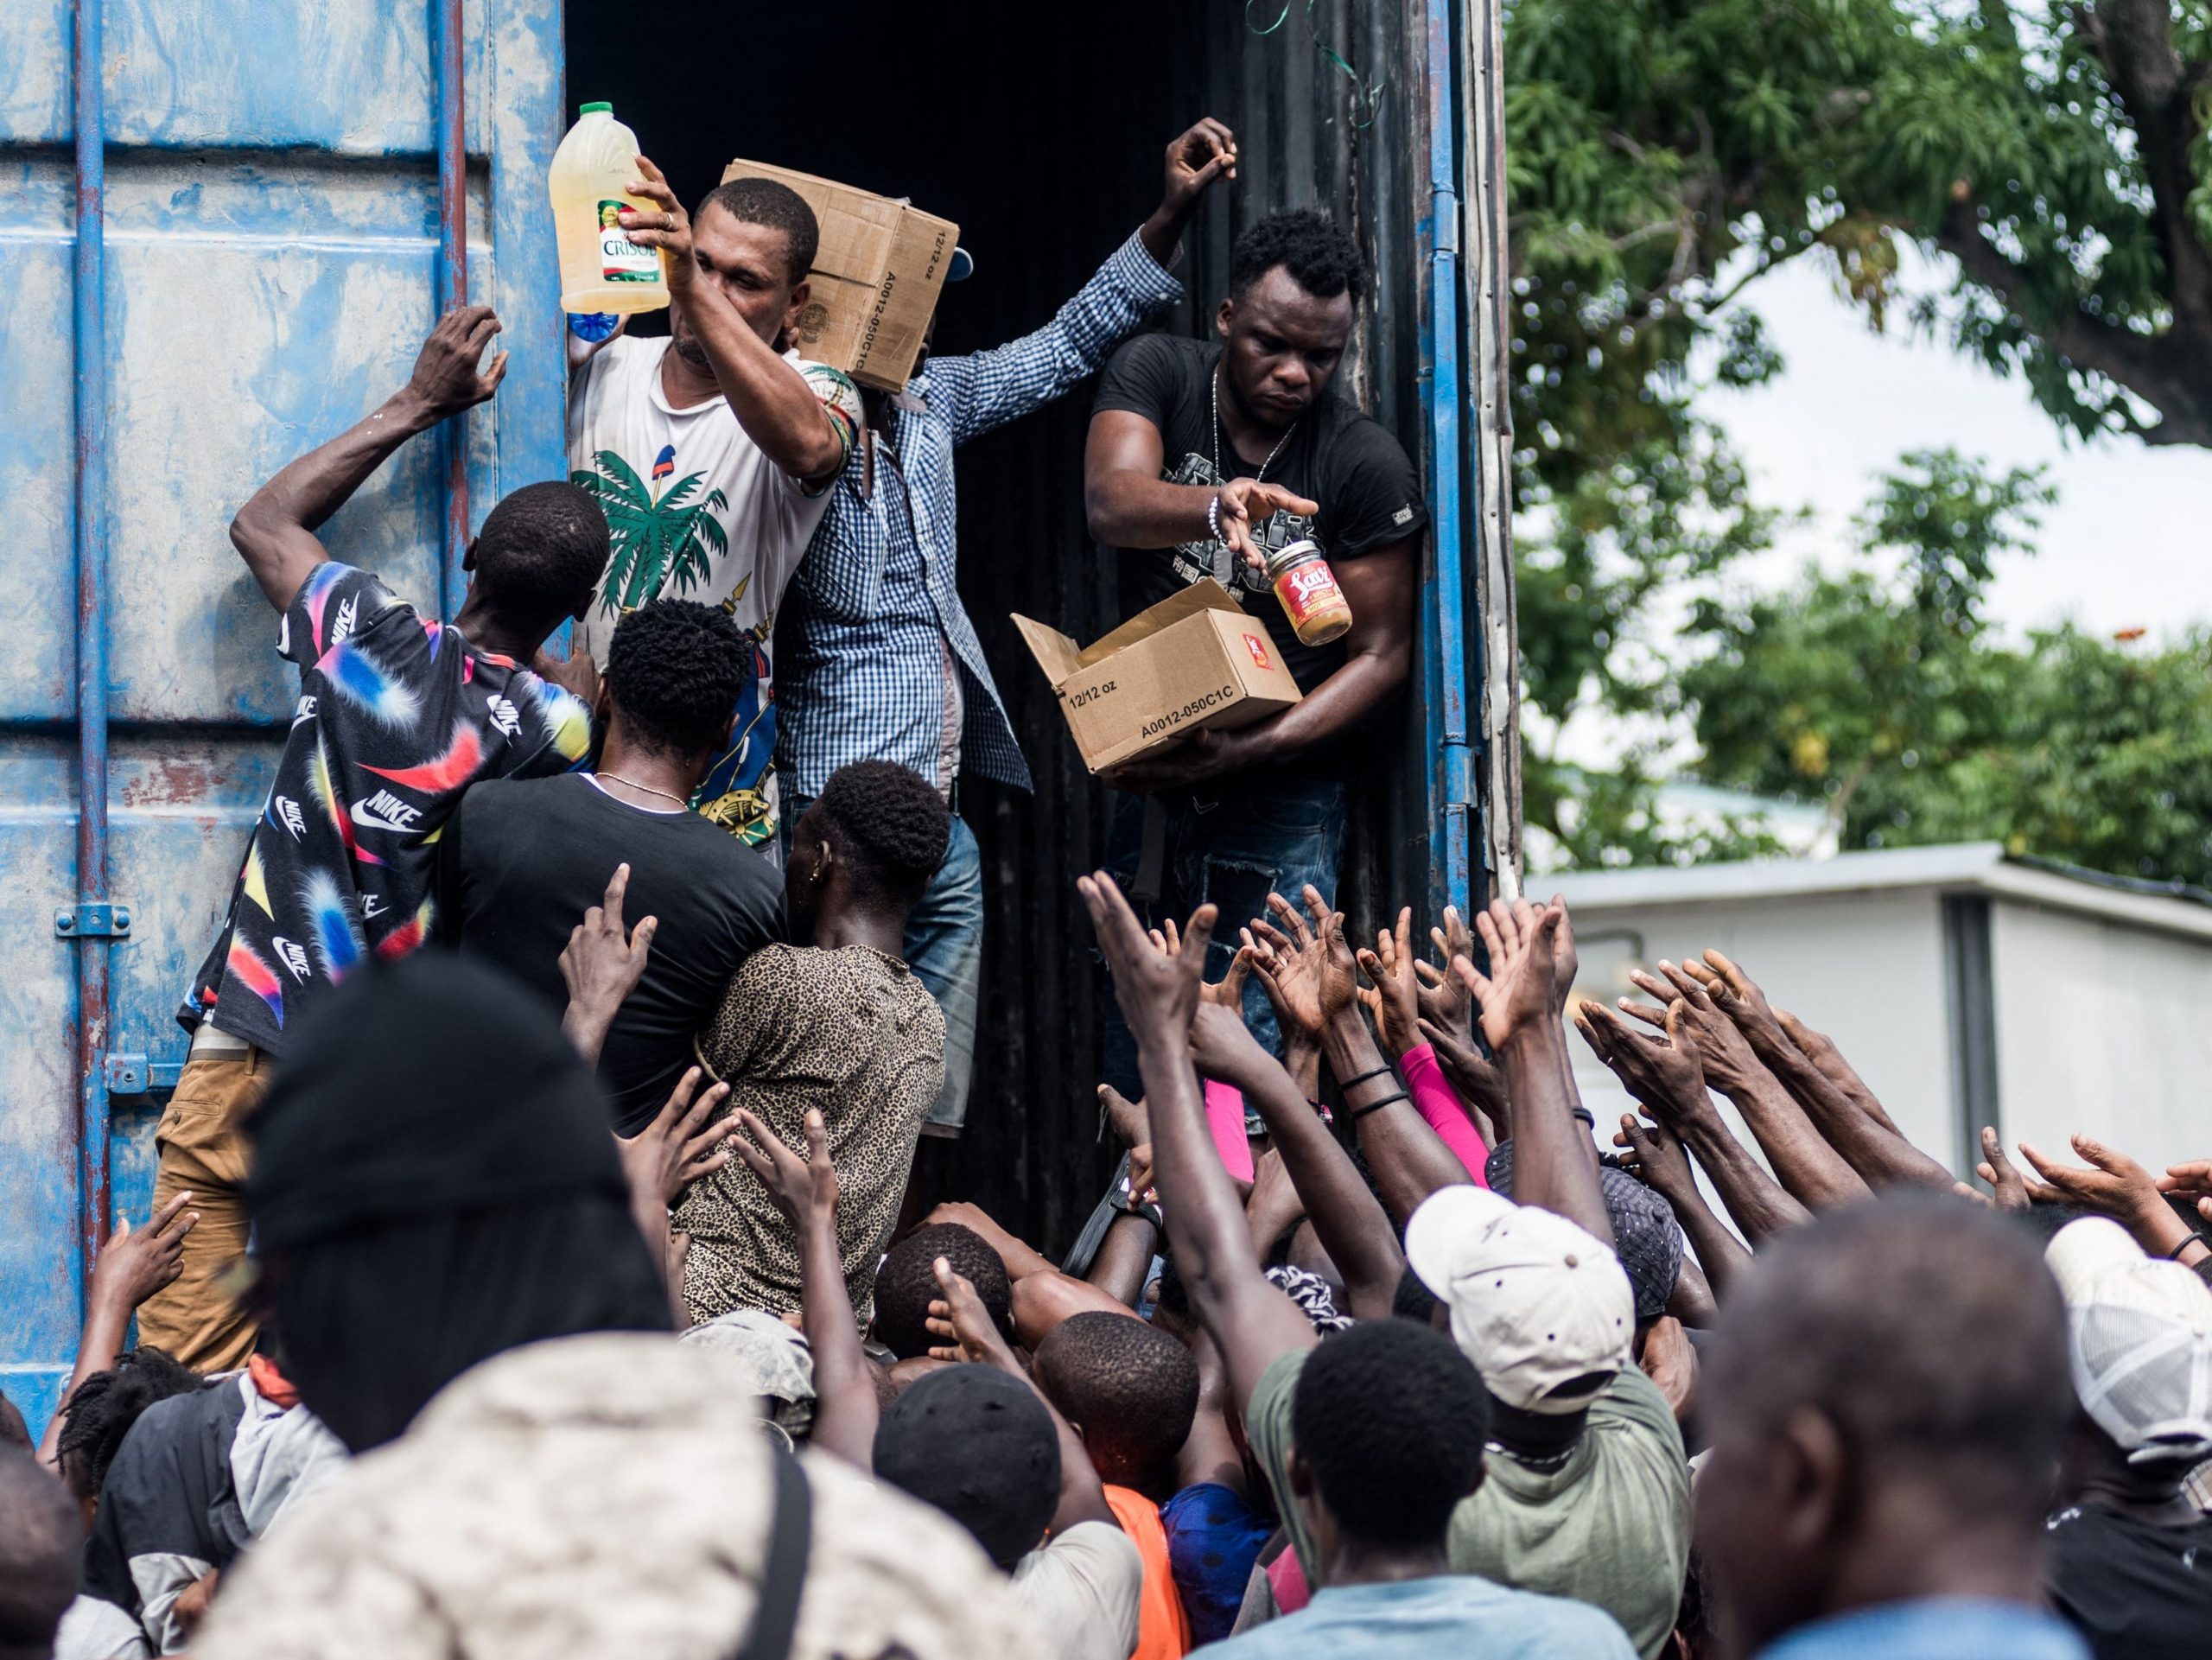 Men hand out supplies to a crowd of earthquake victims during the distribution of food and water at the "4 Chemins" crossroads in Les Cayes, Haiti, August 20, 2021